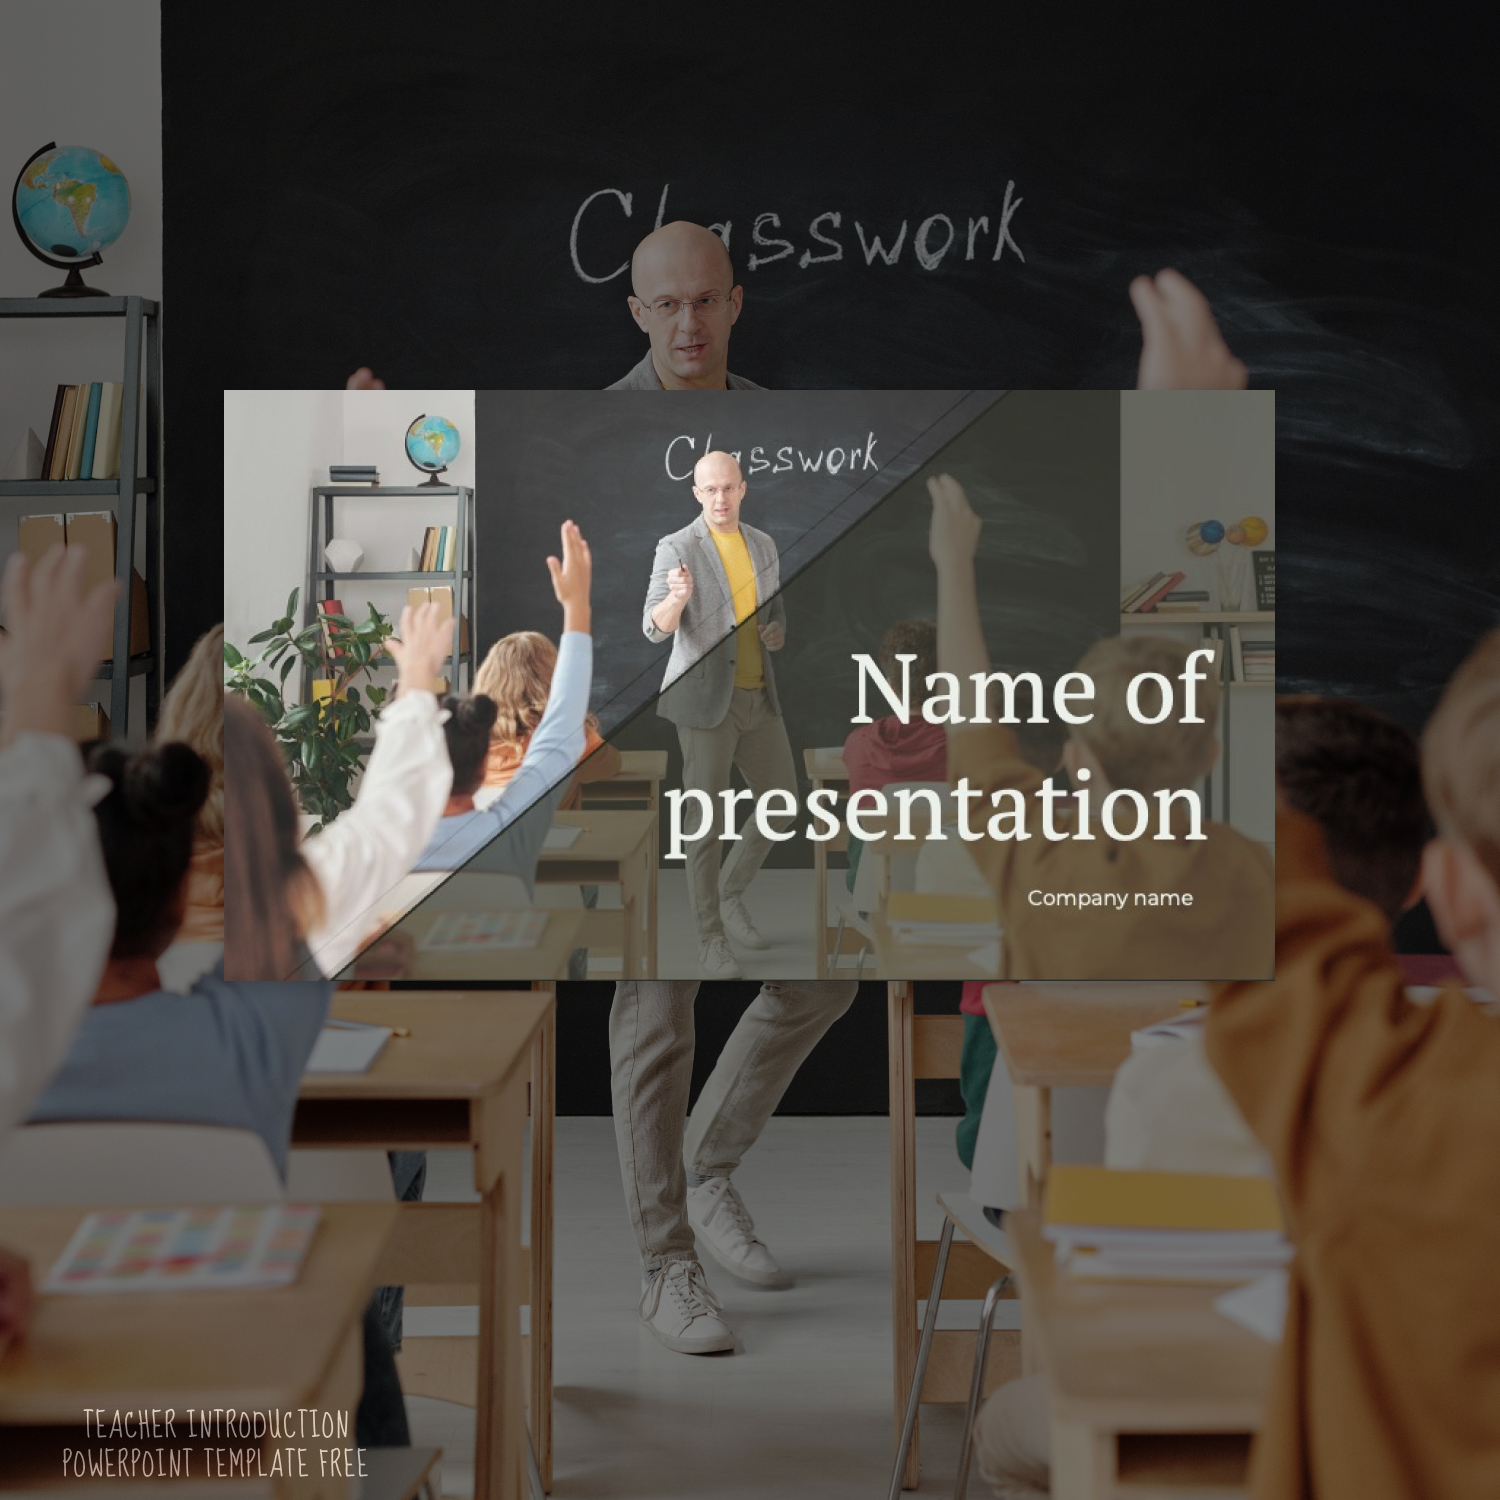 Prints of teacher introduction powerpoint template.